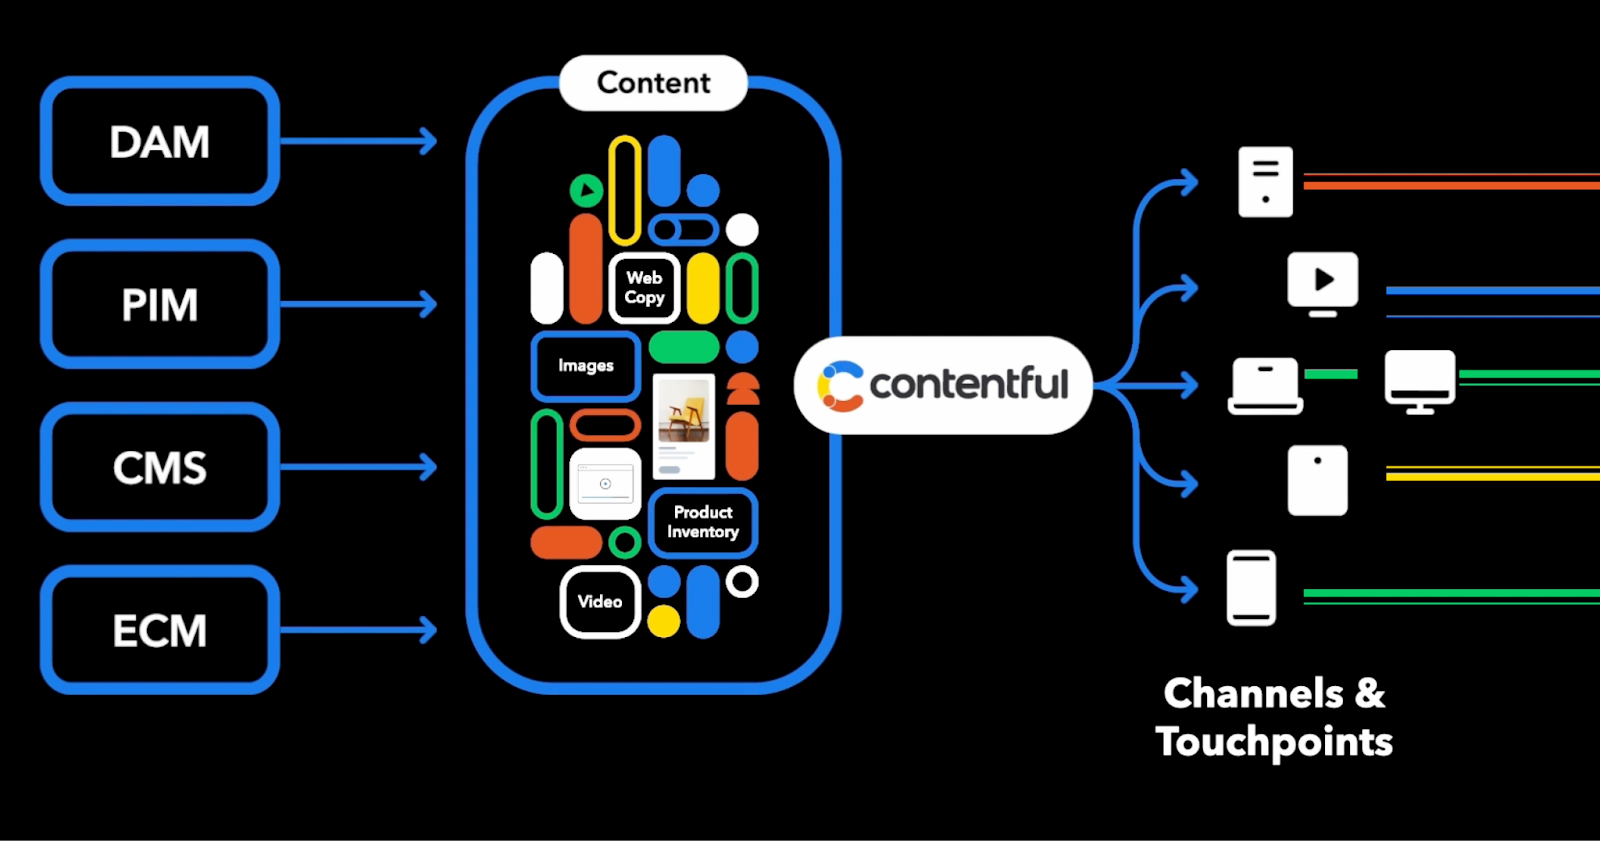 When used to build a composable DXP,  Contentful serves as a content infrastructure that unifies content across different systems. This simplifies content management and ensures consistency across all channels and touchpoints. By centralizing content, different teams (Marketing, Sales, IT) can collaborate more efficiently. By contrast, traditional DXPs may require separate content systems for different content types, creating silos that make collaboration and consistency challenging.